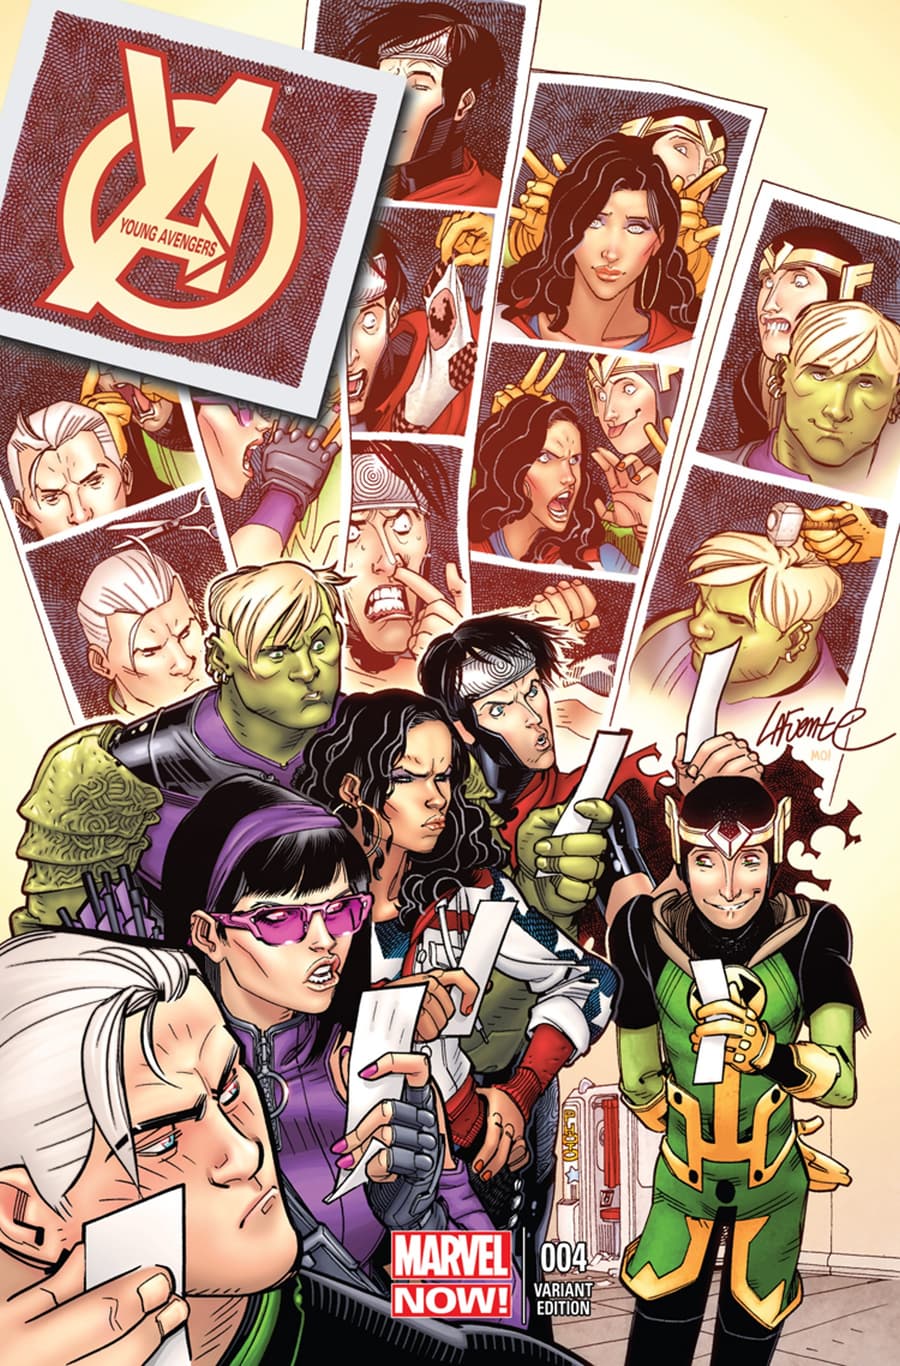 YOUNG AVENGERS (2013) #4 variant cover by David Lafuente